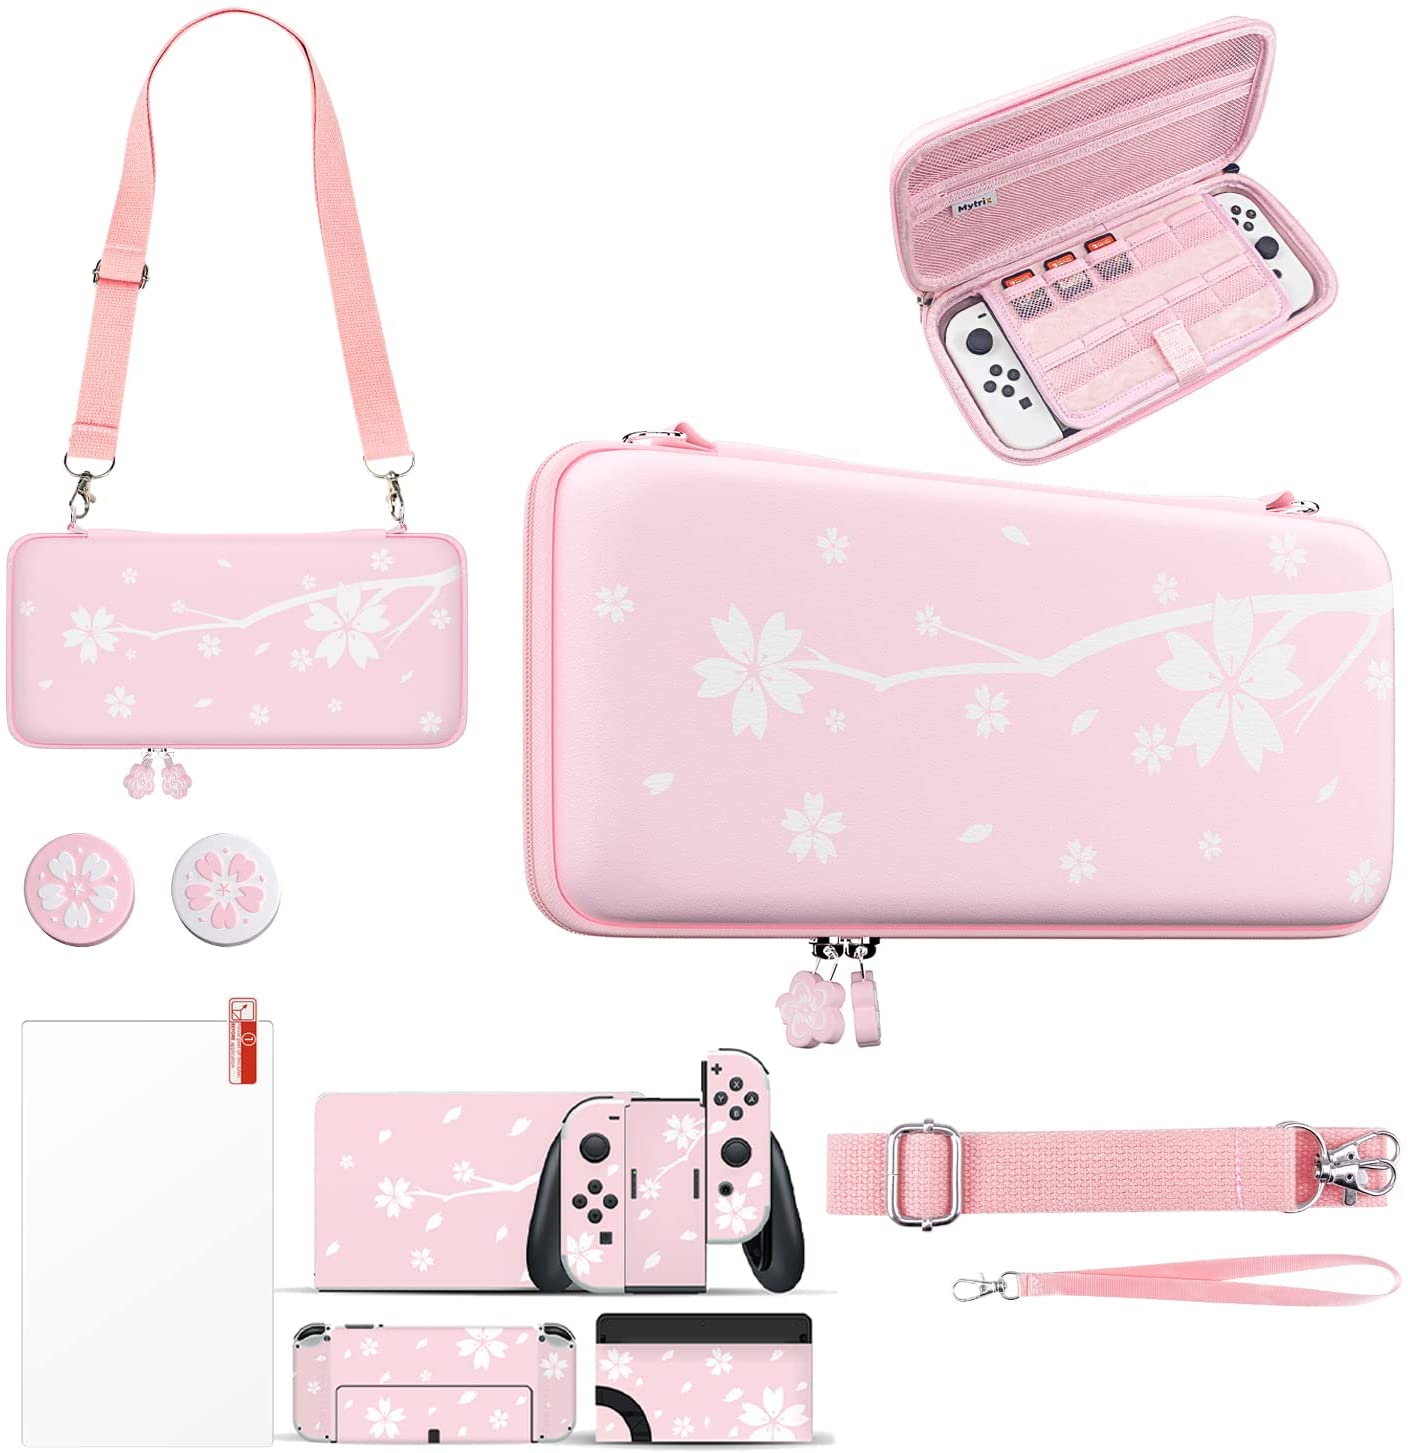 Mytrix Sakura Pink Carrying Case 4 in 1 Bundle for Nintendo Switch OLED, Skin Stickers, Screen Protector, 2 Joystick Caps